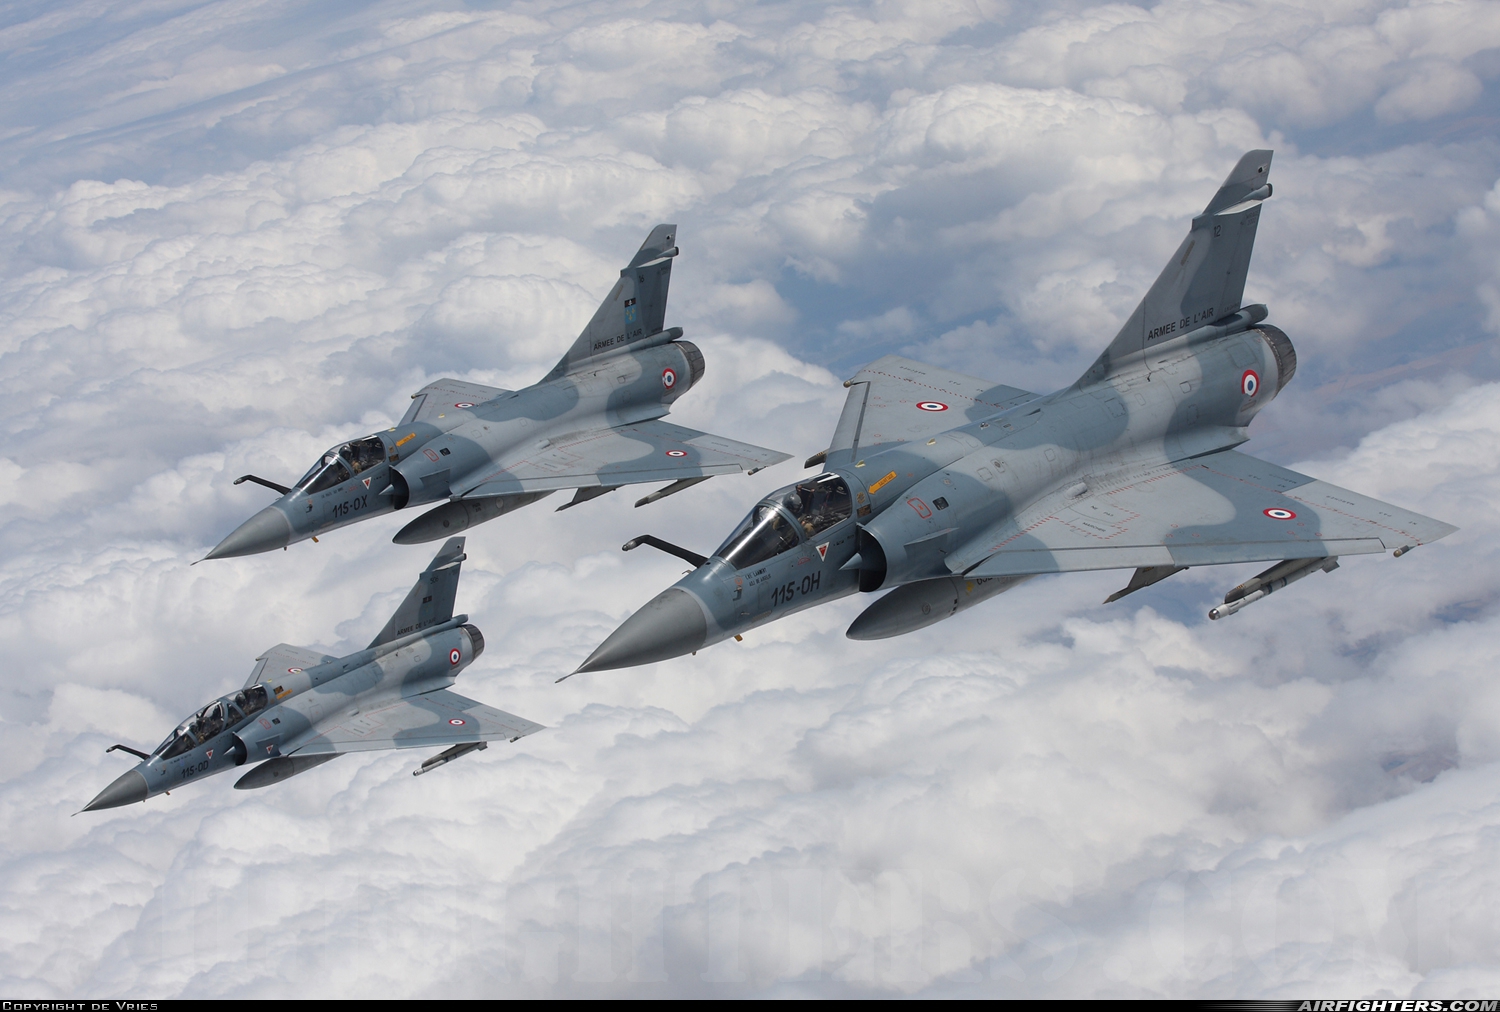 France - Air Force Dassault Mirage 2000C 12 at In Flight, France